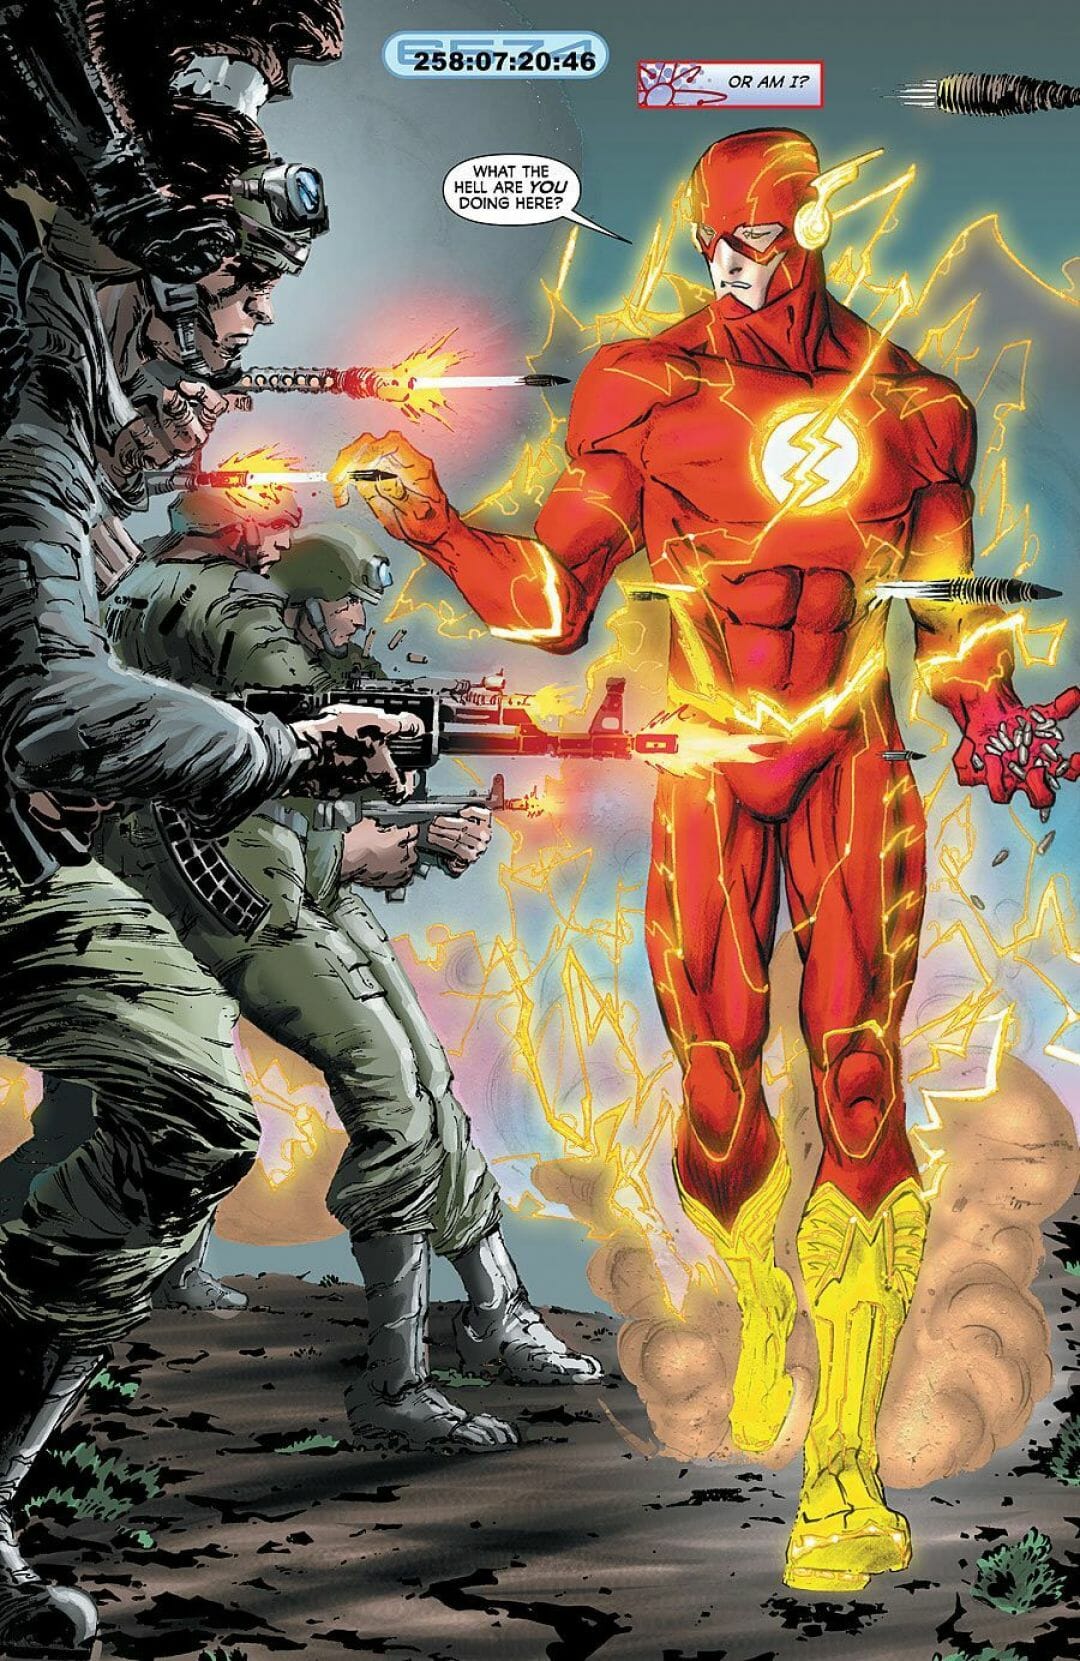 The Flash Comic Wallpapers